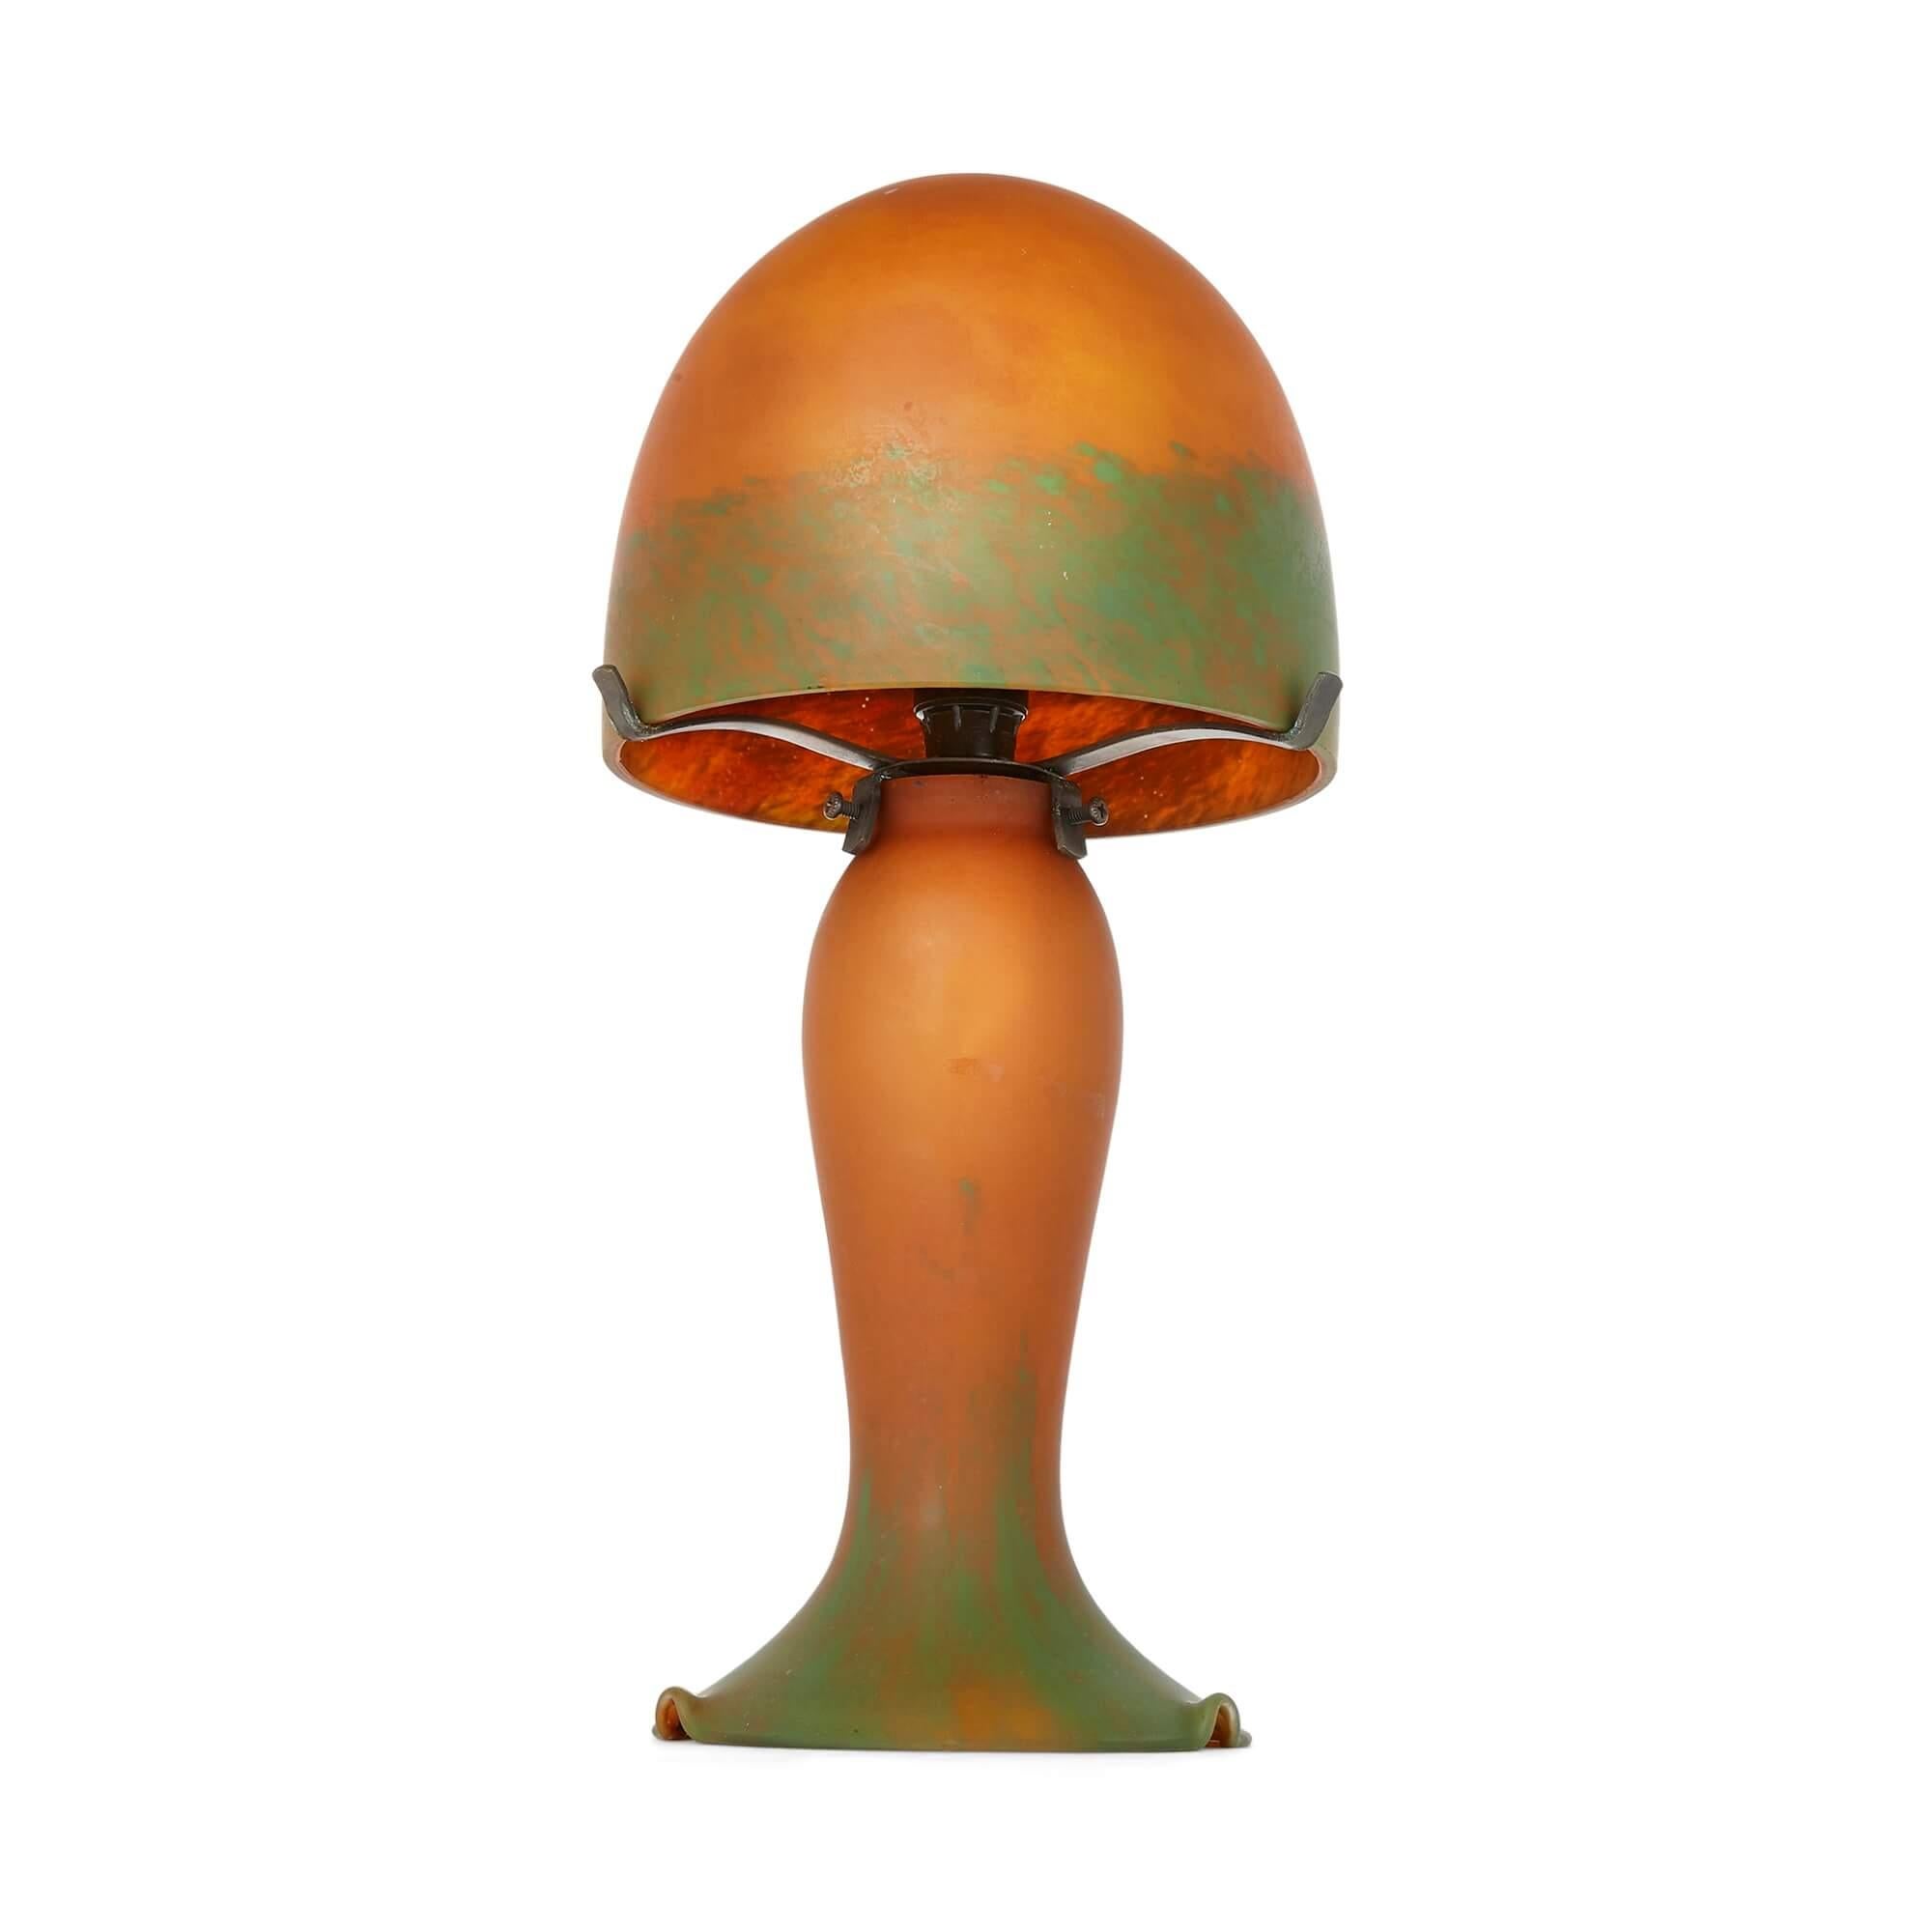 French Art Nouveau glass lamp attributed to Daum
French, c. 1900
Measures: Height 38cm, diameter 18cm

The desire of the Art Nouveau artists to emulate natural forms is brought out brilliantly in this mushroom-shaped lamp. The lamp's design has